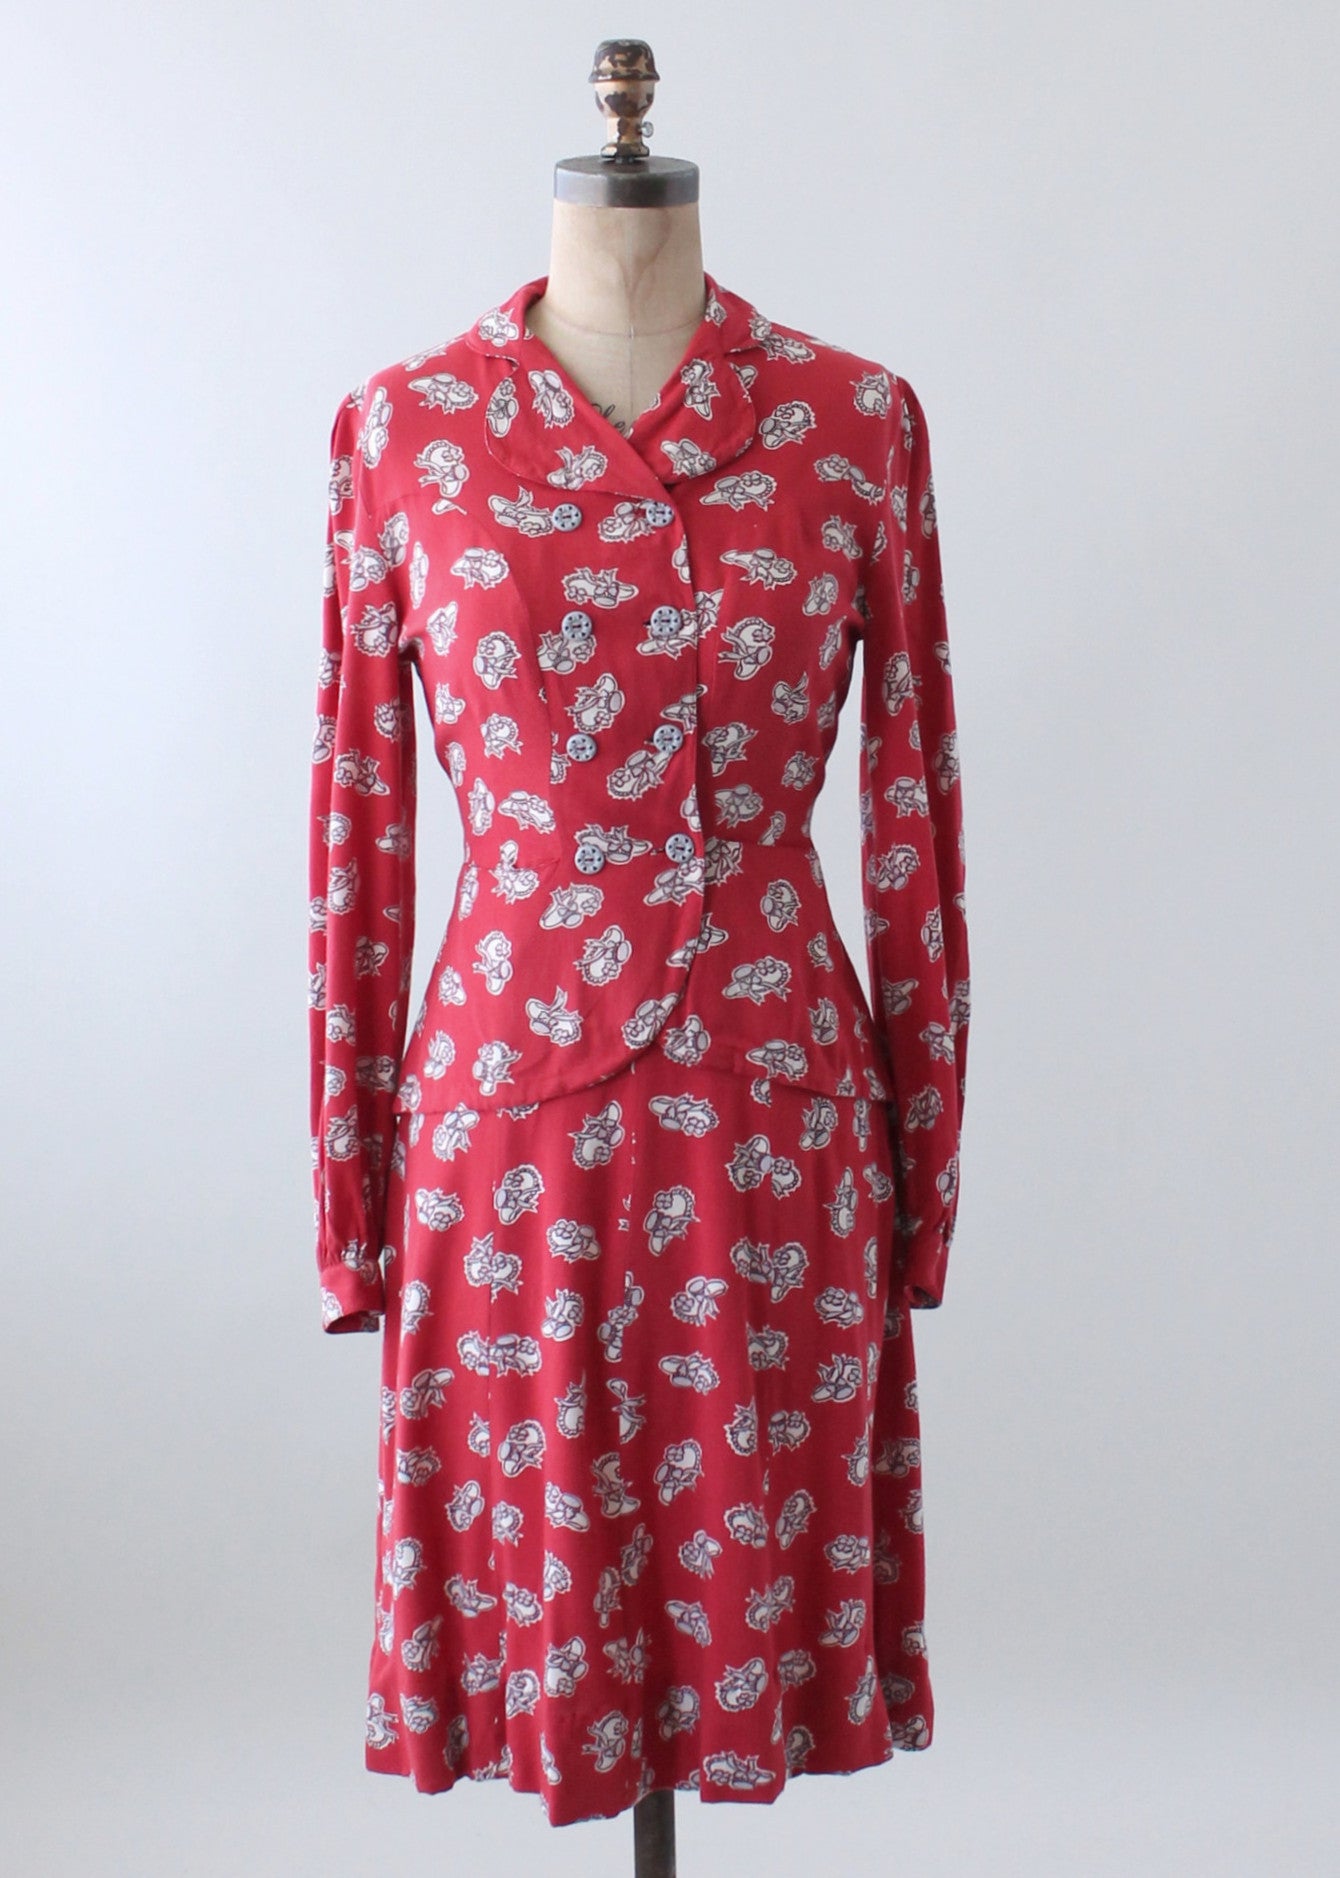 Vintage 1940s Hats Novelty Print Rayon Suit - Raleigh Vintage